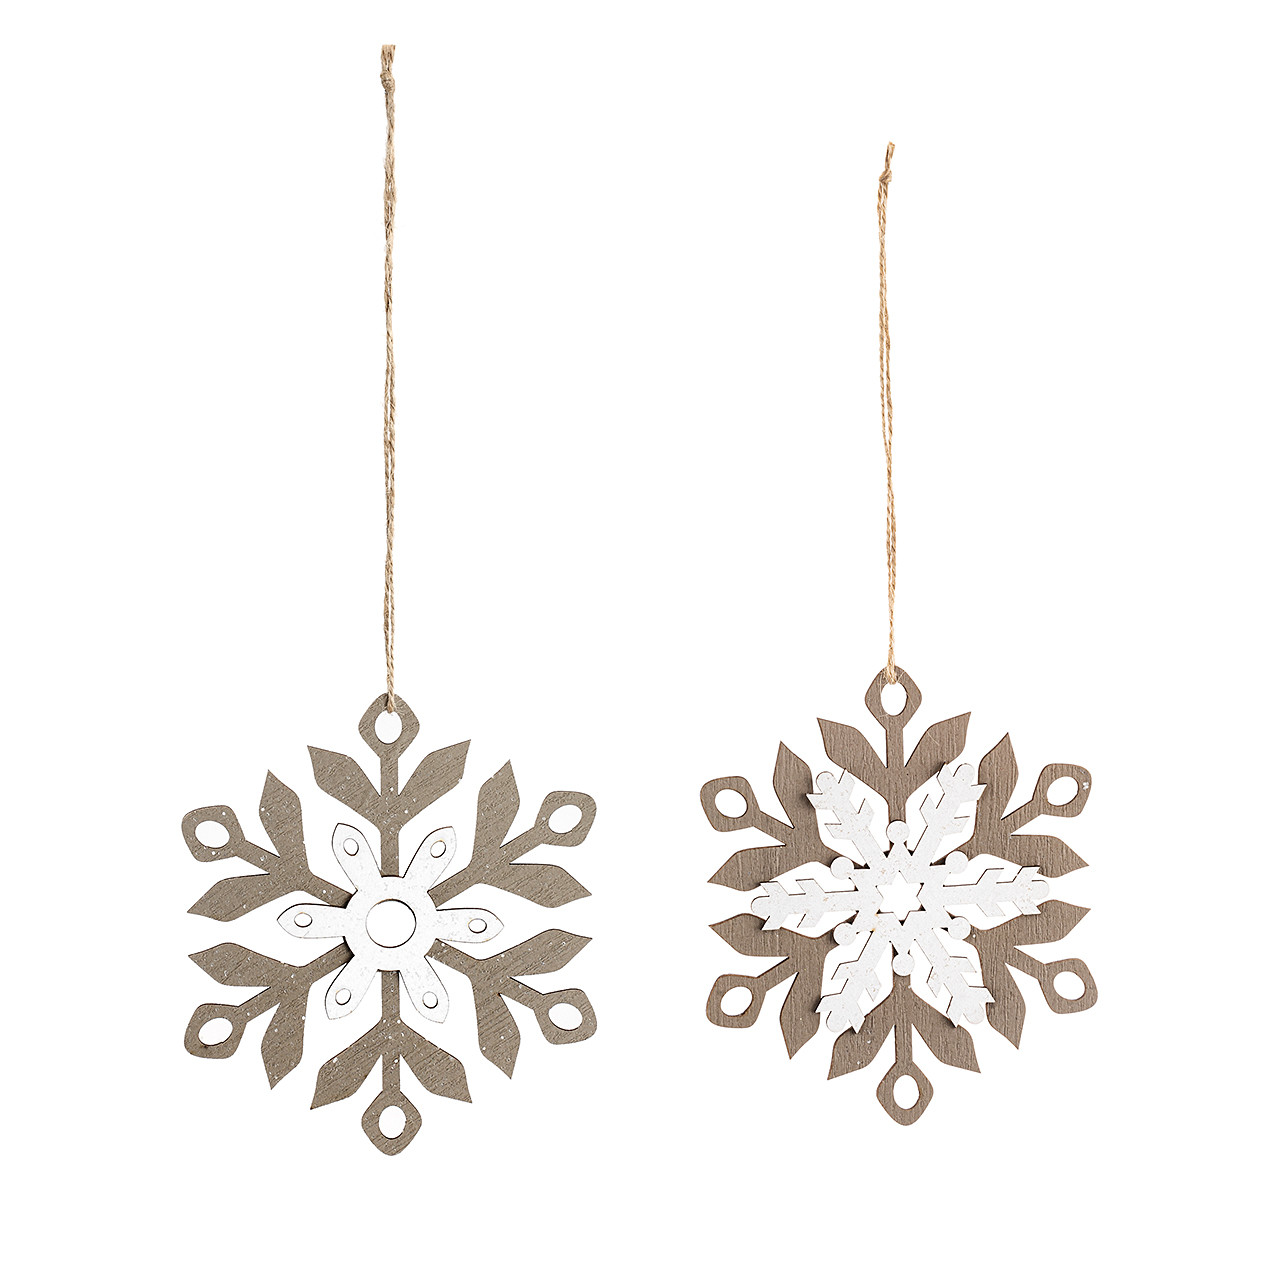 In-Store Only - White Wood Snowflake Ornaments, Set of 2 